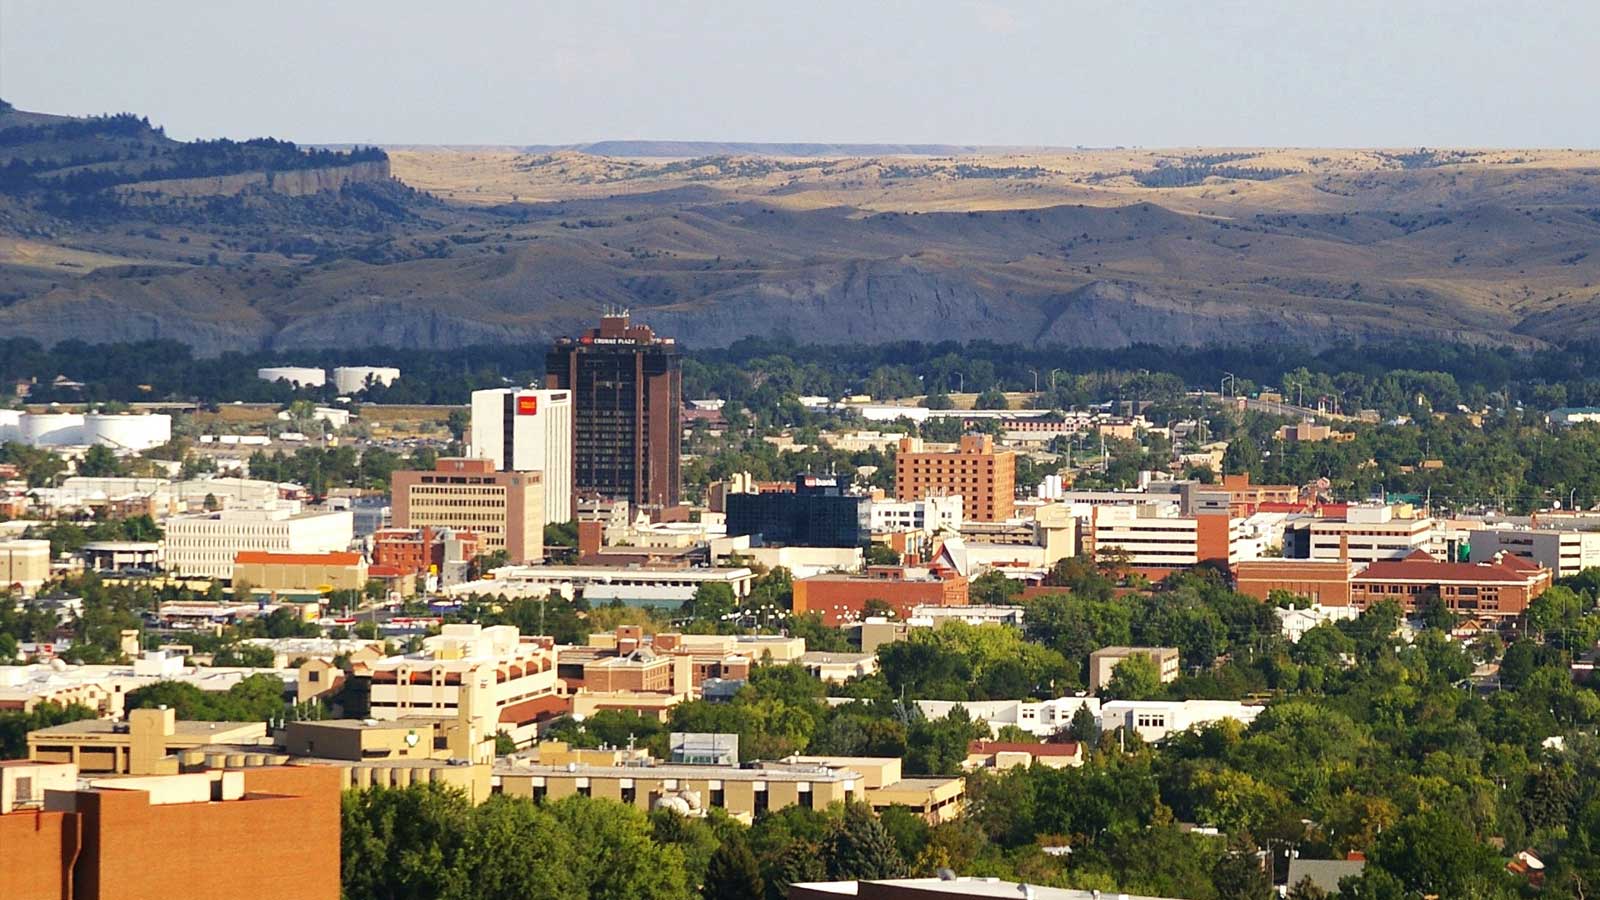 billings montana skyline cityscape during daytime mountains in back